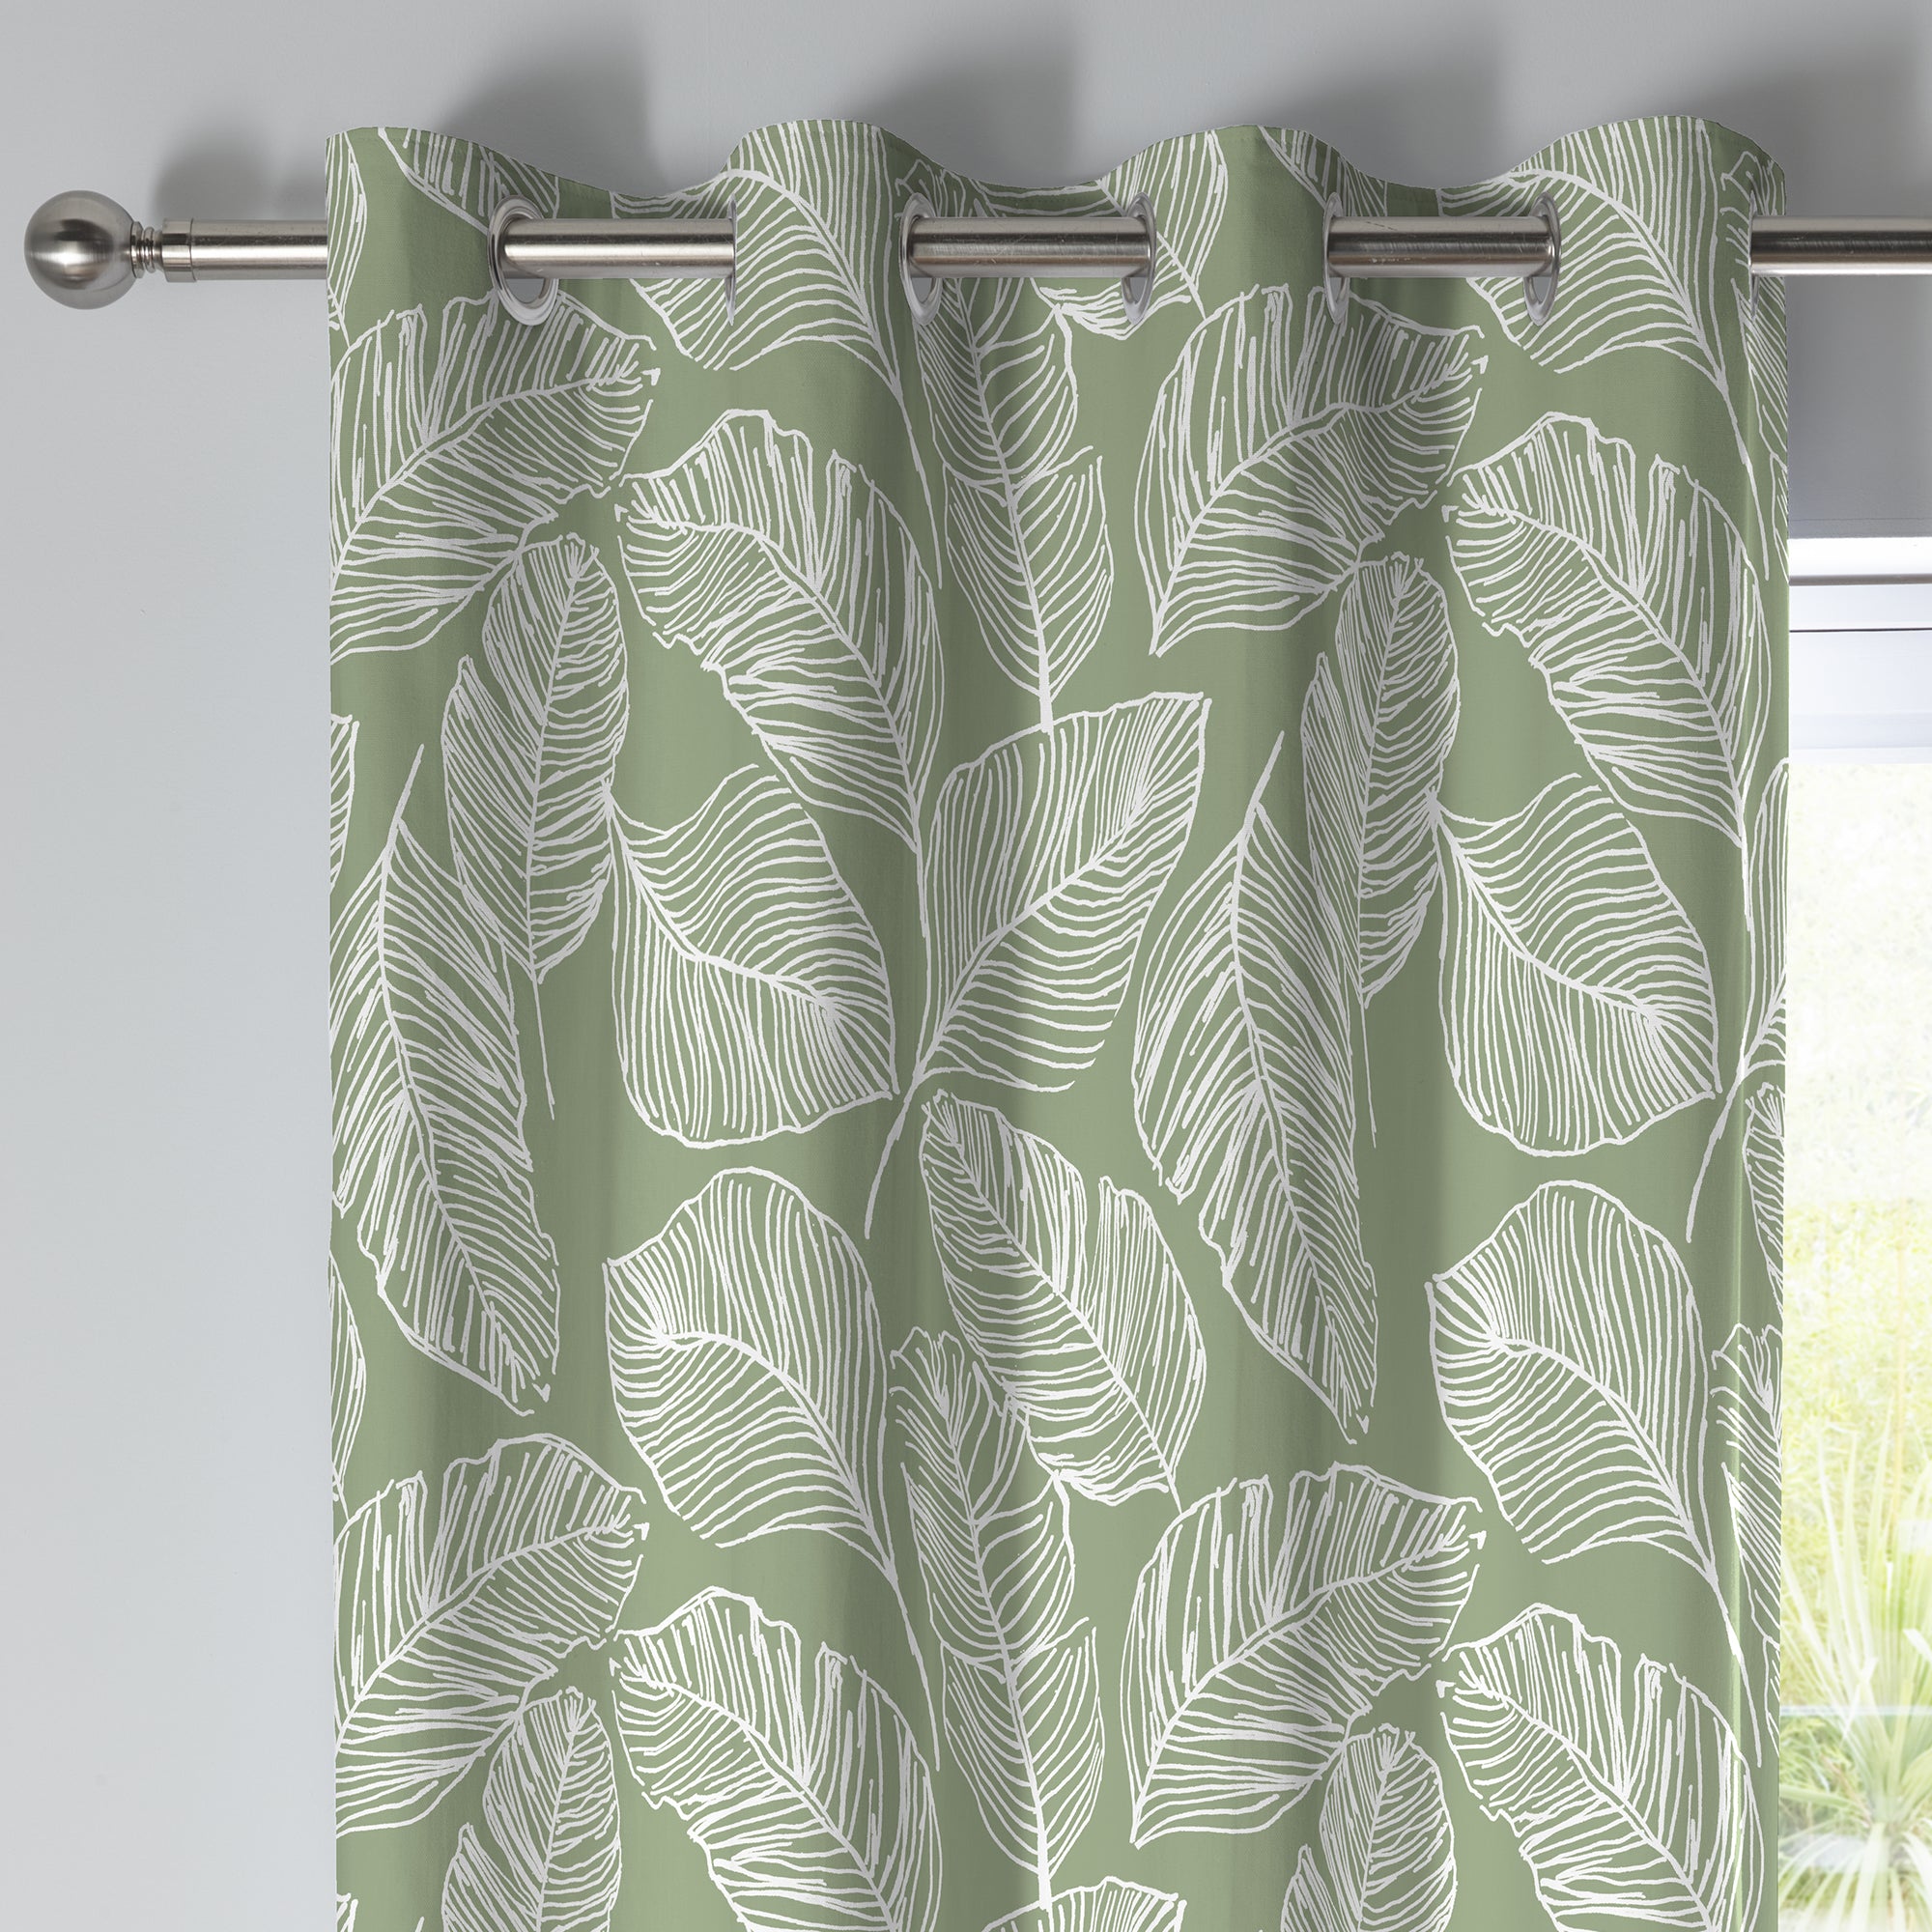 Matteo - 100% Cotton Pair of Eyelet Curtains in Green - by Fusion